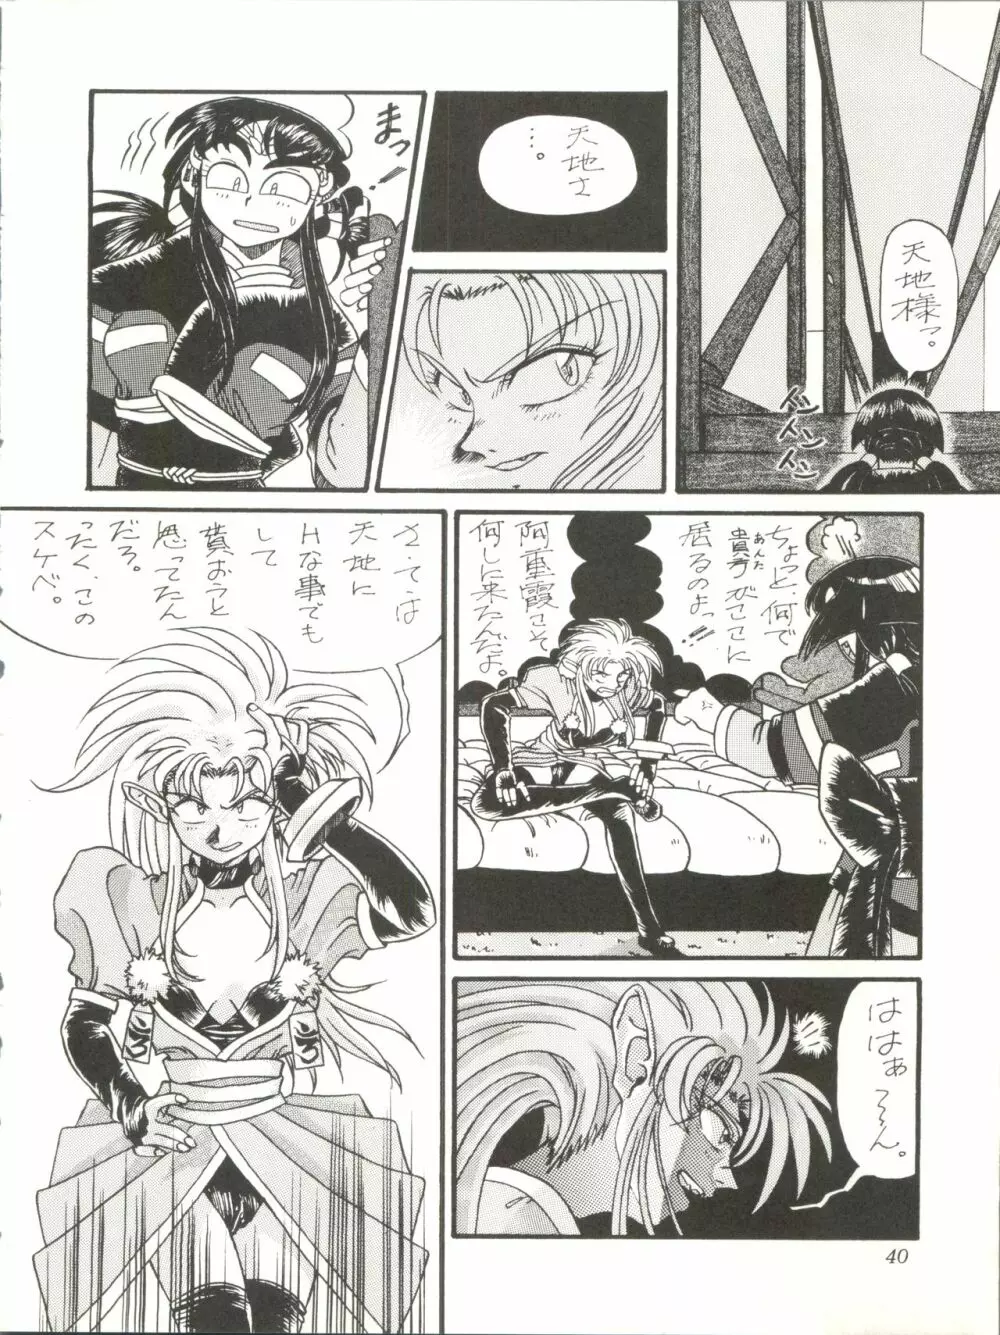 Milky Syndrome EX 2 Page.40